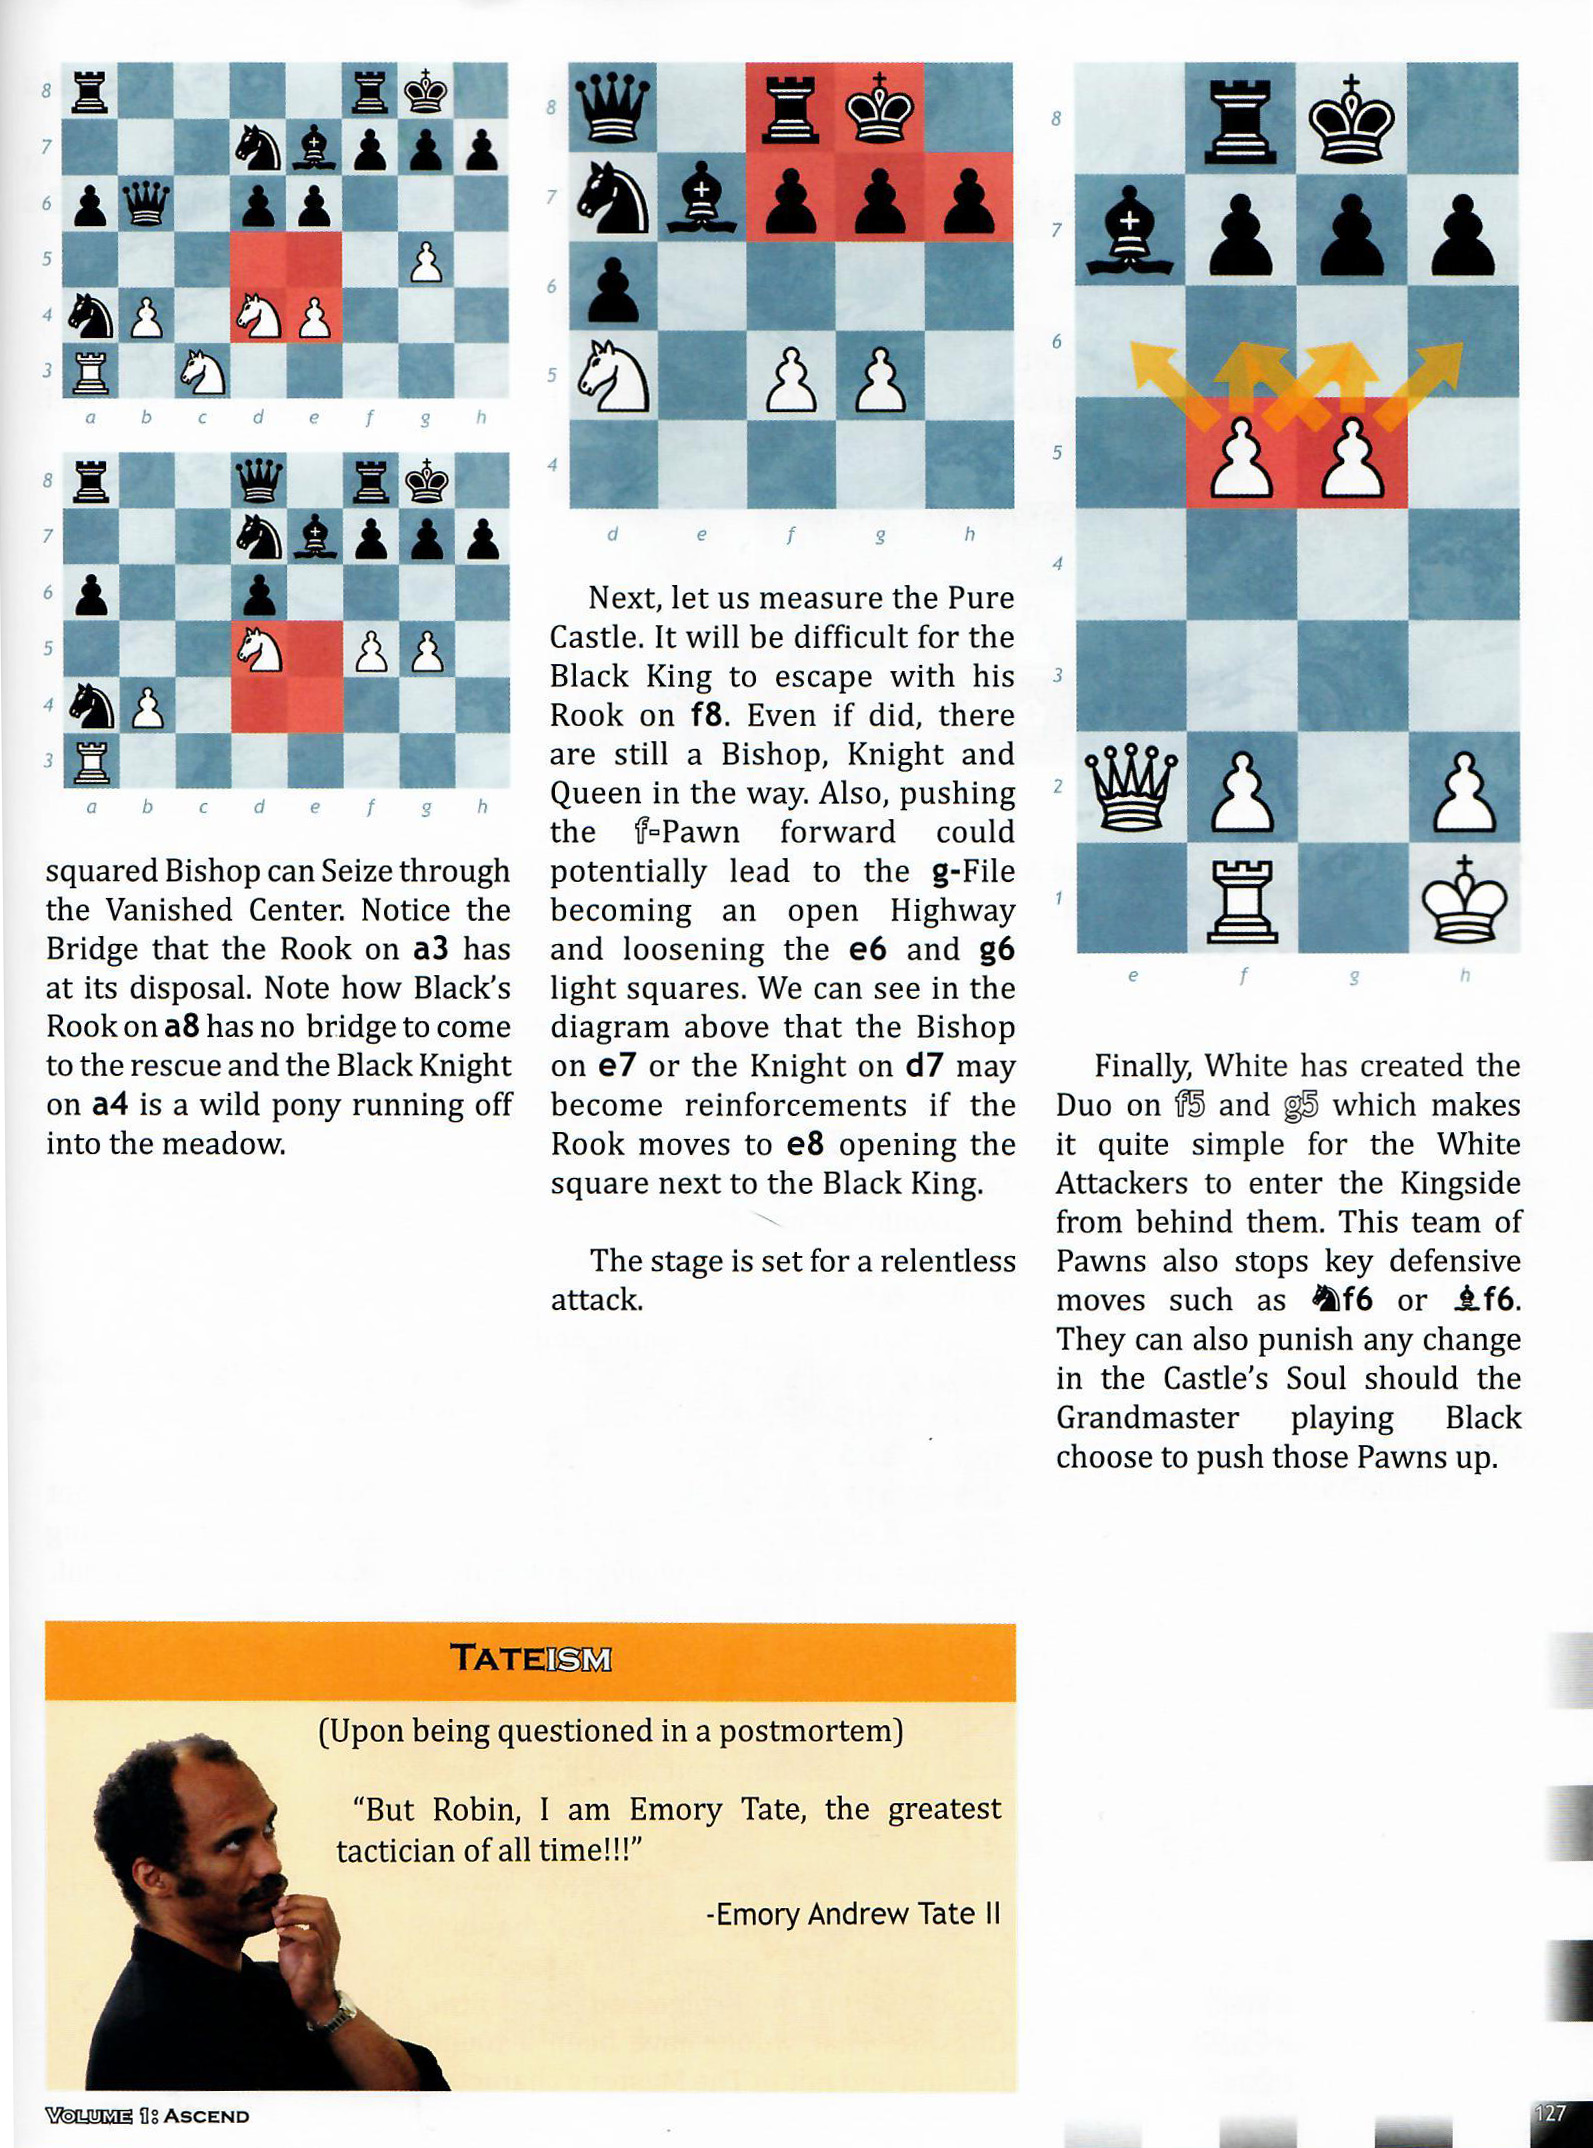 Emory Tate's 5 Most BRILLIANT Chess Moves 